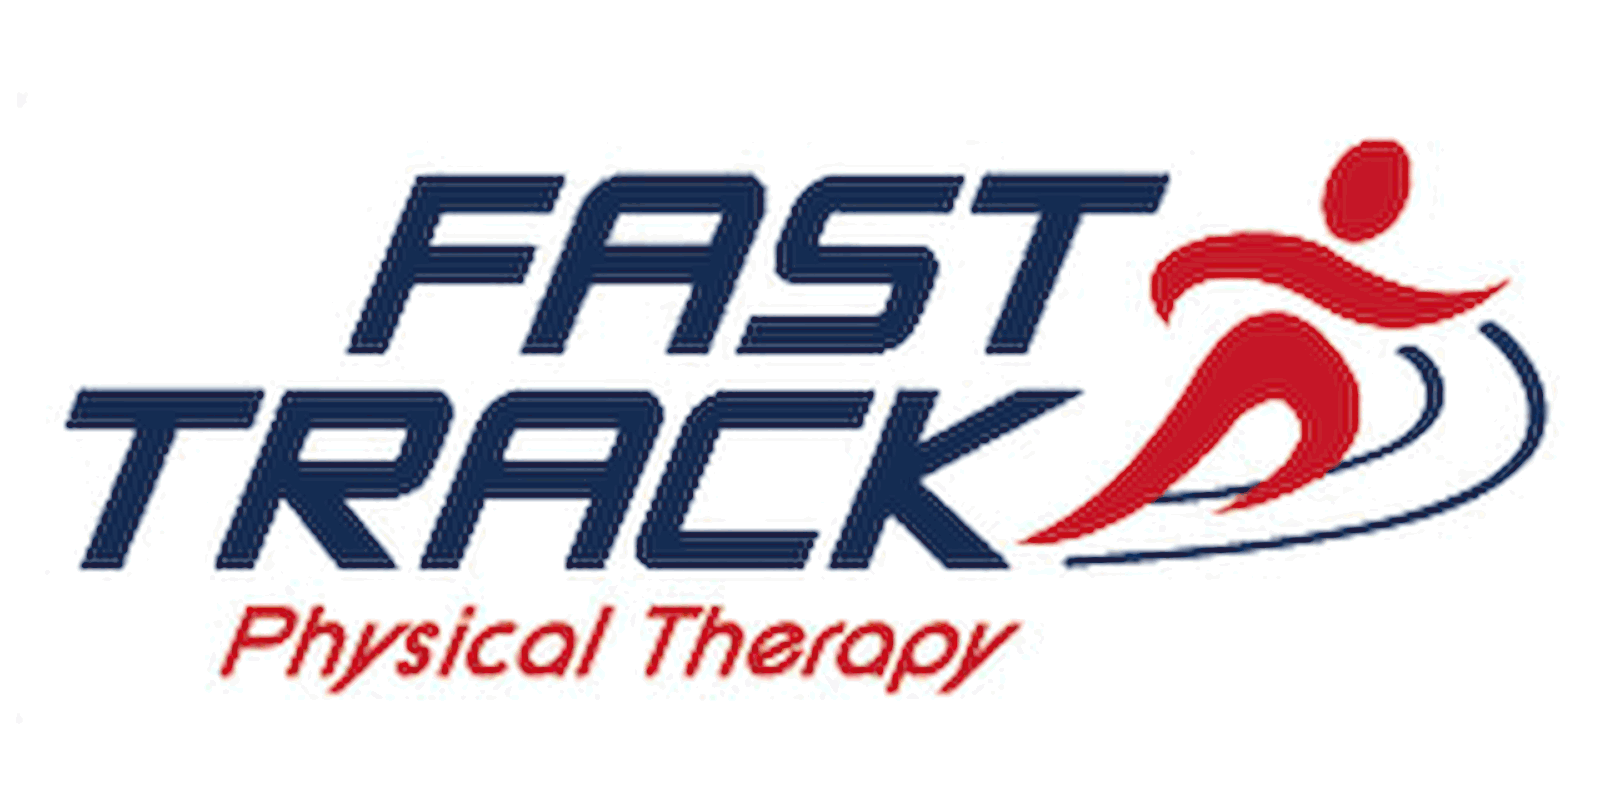 Fast Track Physical Therapy